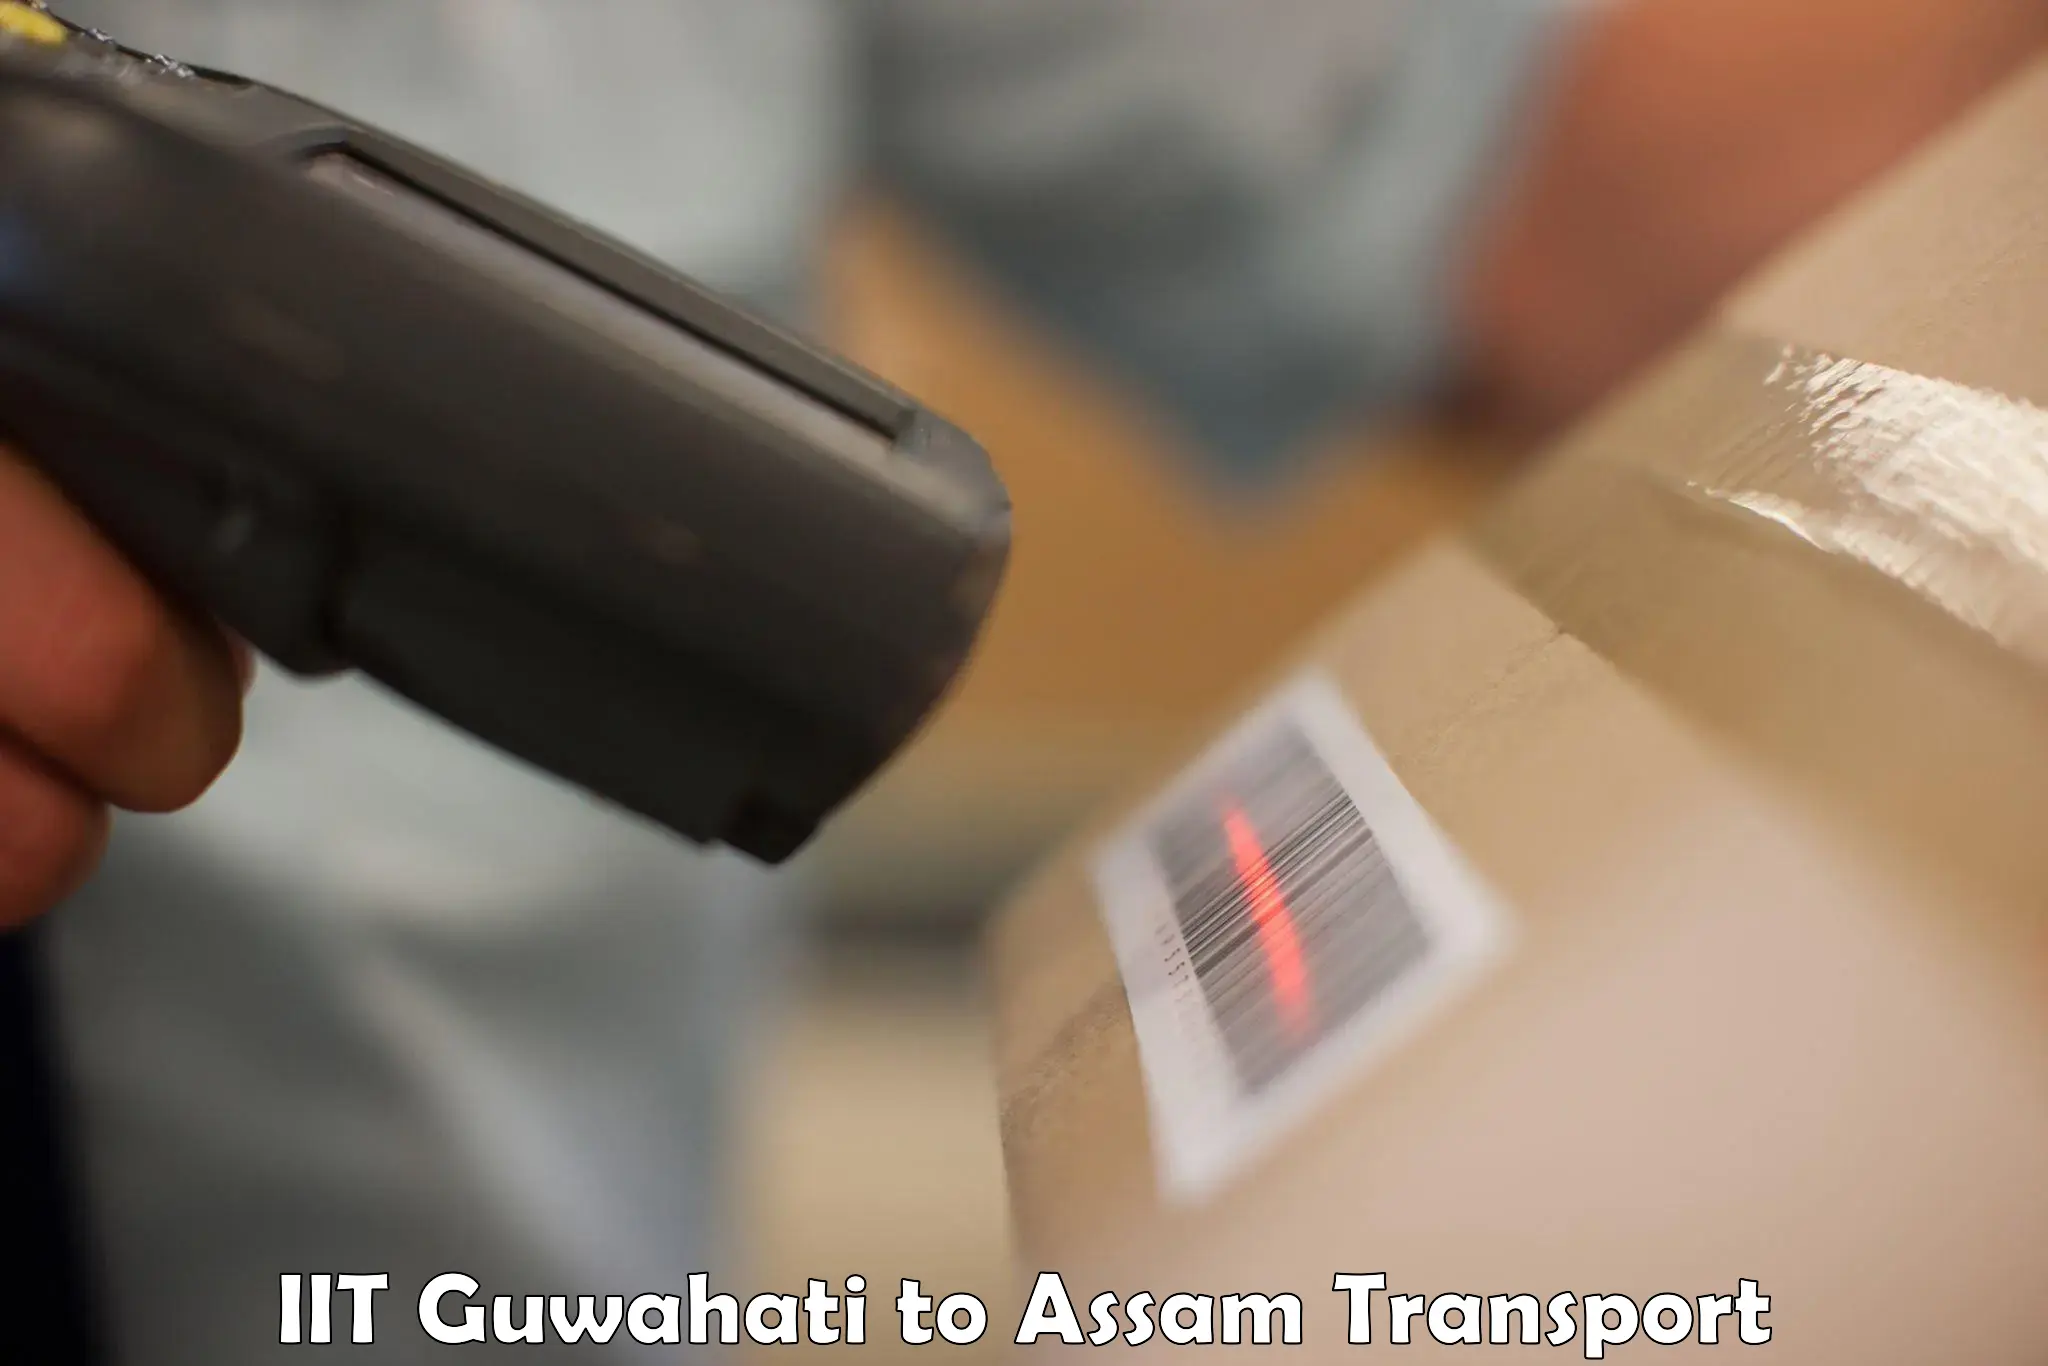 Pick up transport service in IIT Guwahati to Assam